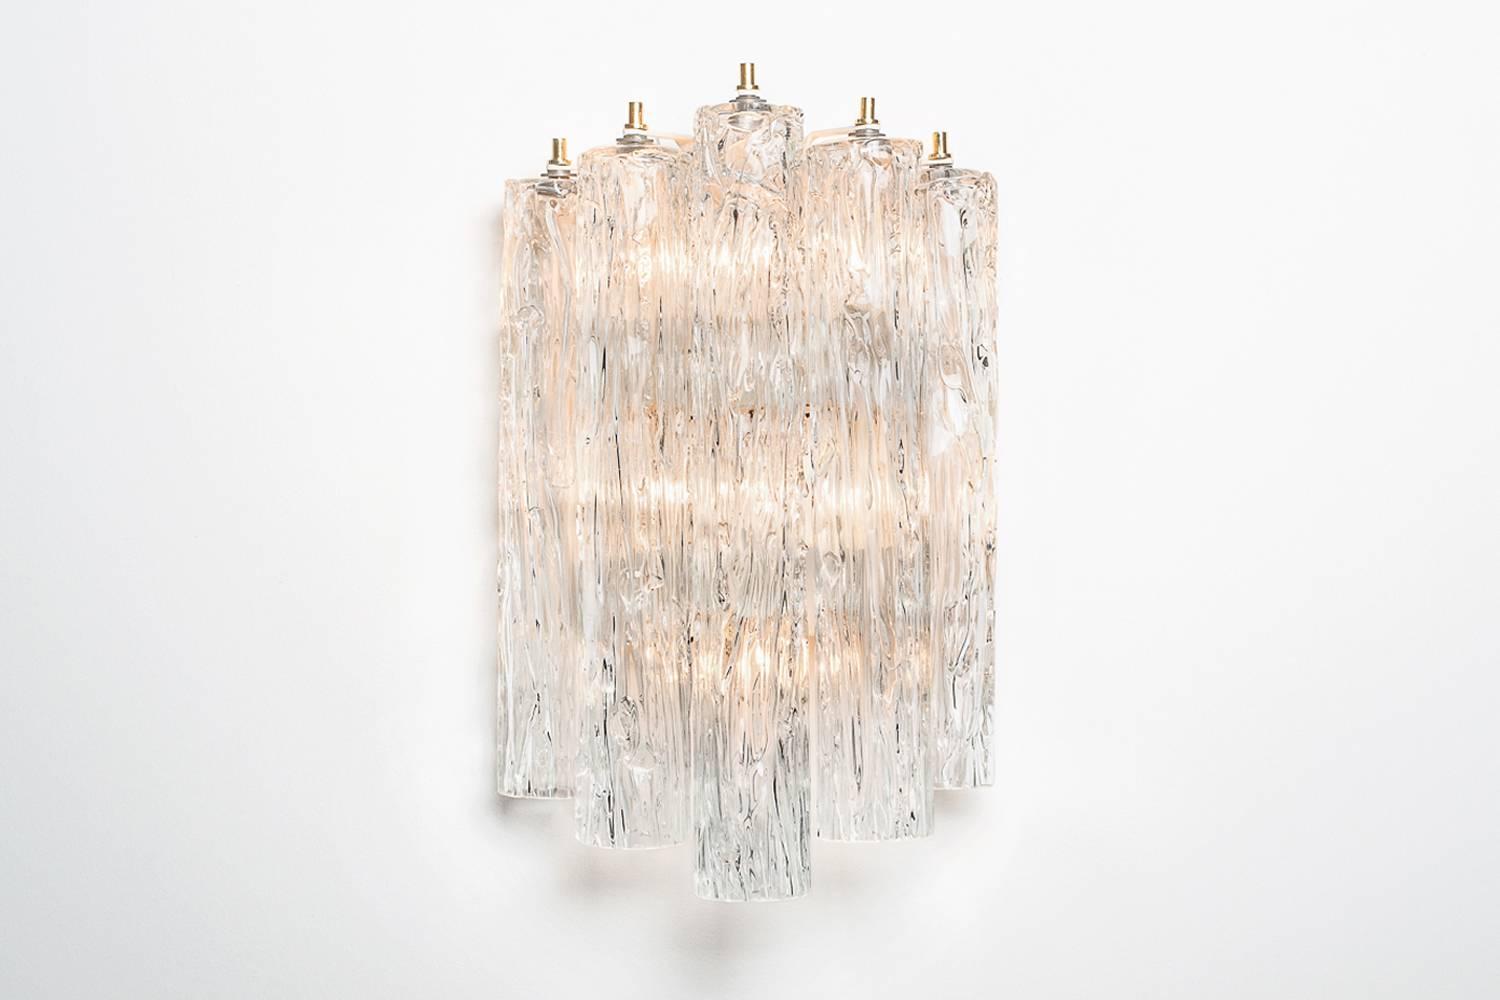 Extraordinary Murano wall sconce by Toni Zuccheri for Venini, Italy 1960s. Beautiful ‘Cortecci’ (tree bark) artistic clear glass tubes in Very Big size, ø 7 x L 46 cm. The heavy tubes are mounted with nice brass hoods to the solid framing. The lamp